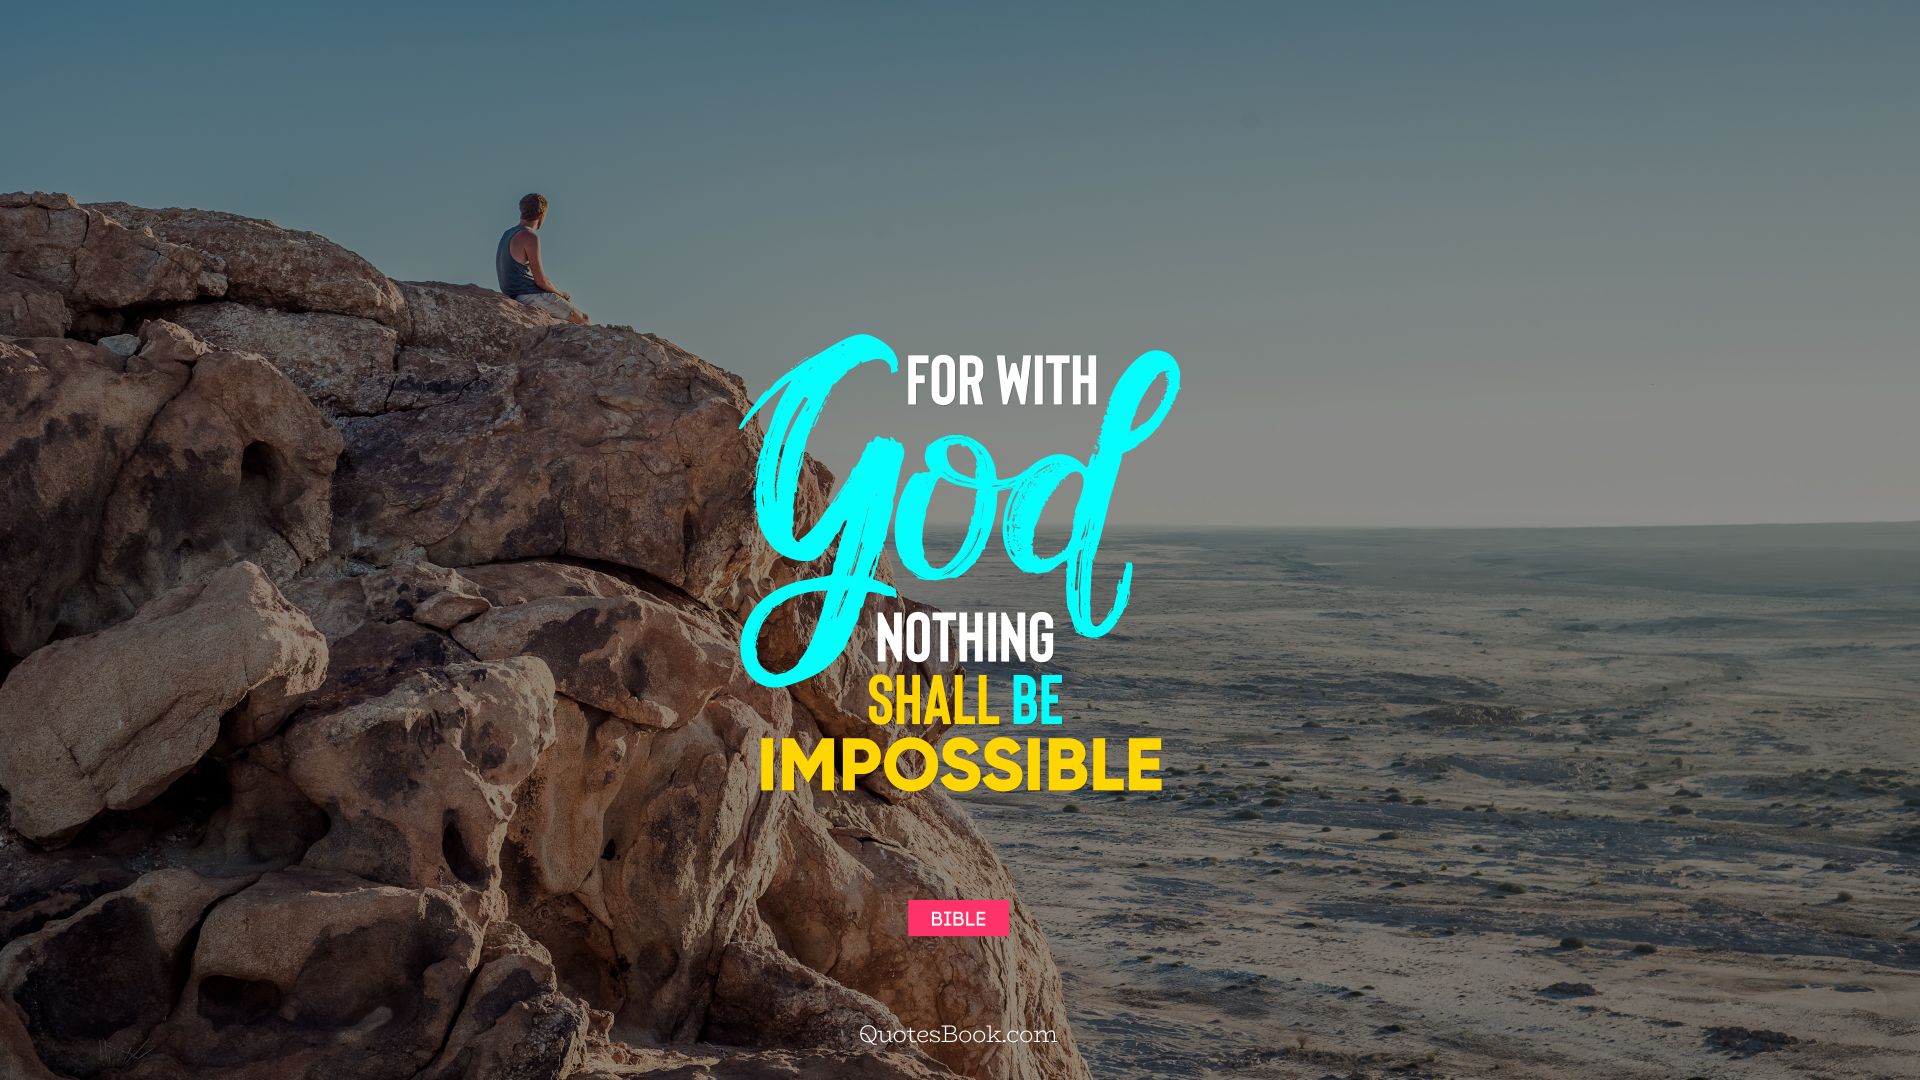 For with God nothing shall be impossible. - Quote by Bible